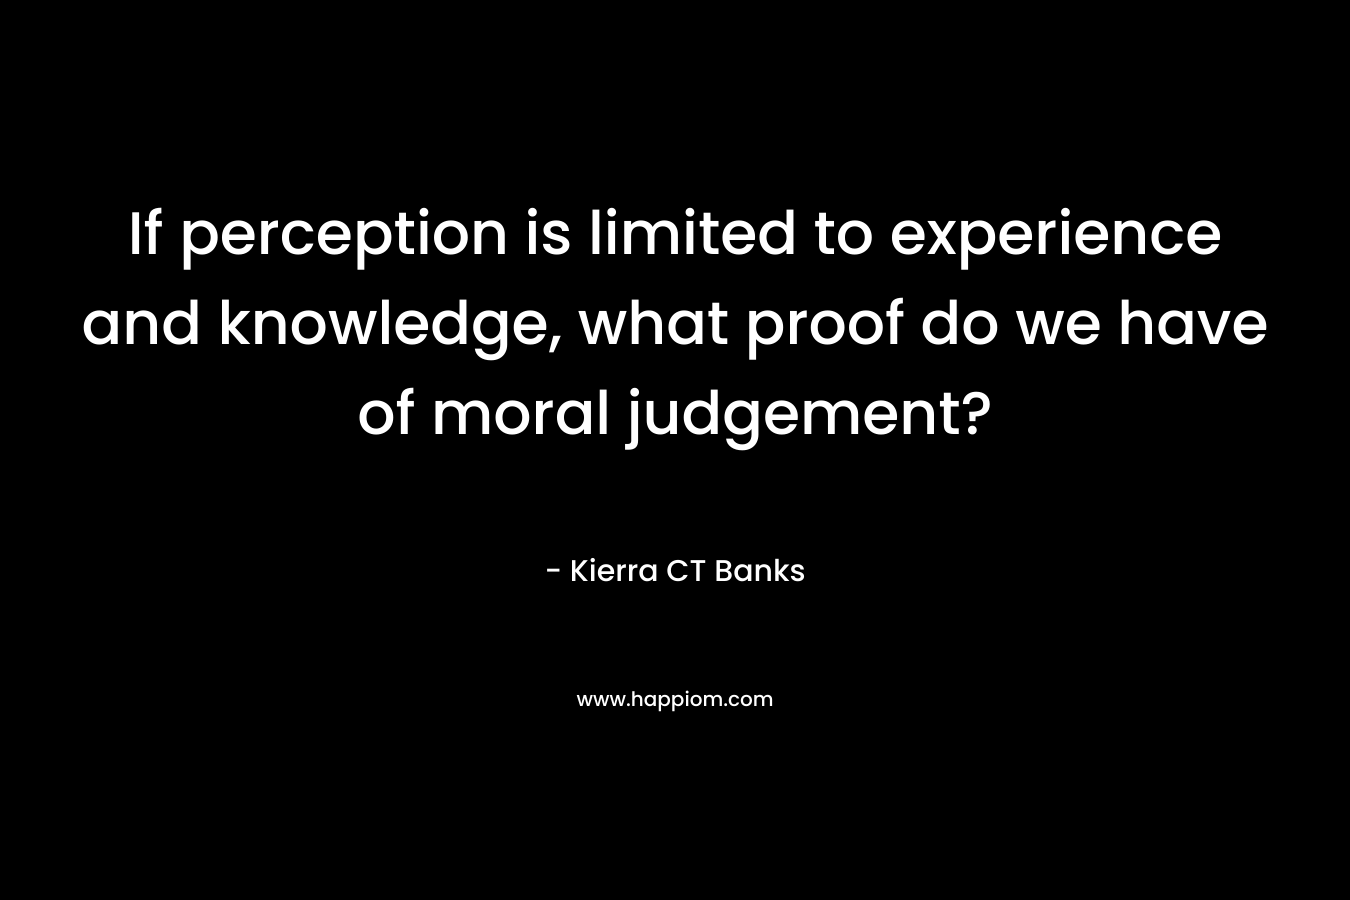 If perception is limited to experience and knowledge, what proof do we have of moral judgement? – Kierra CT Banks